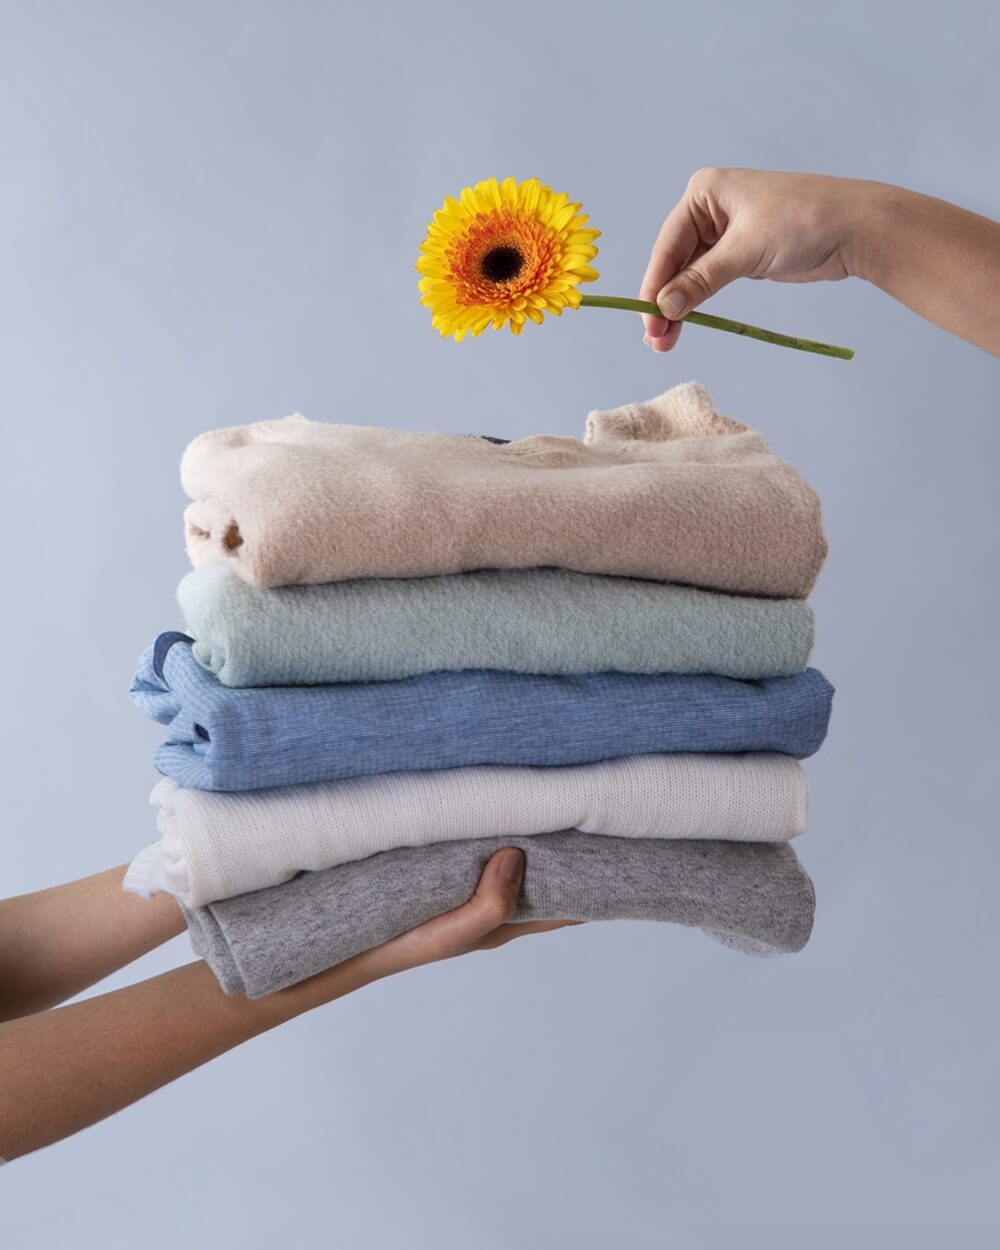 side-view of two people holding clothes with a flower, using eco-friendly products to keep their clothes clean and fresh while protecting the planet